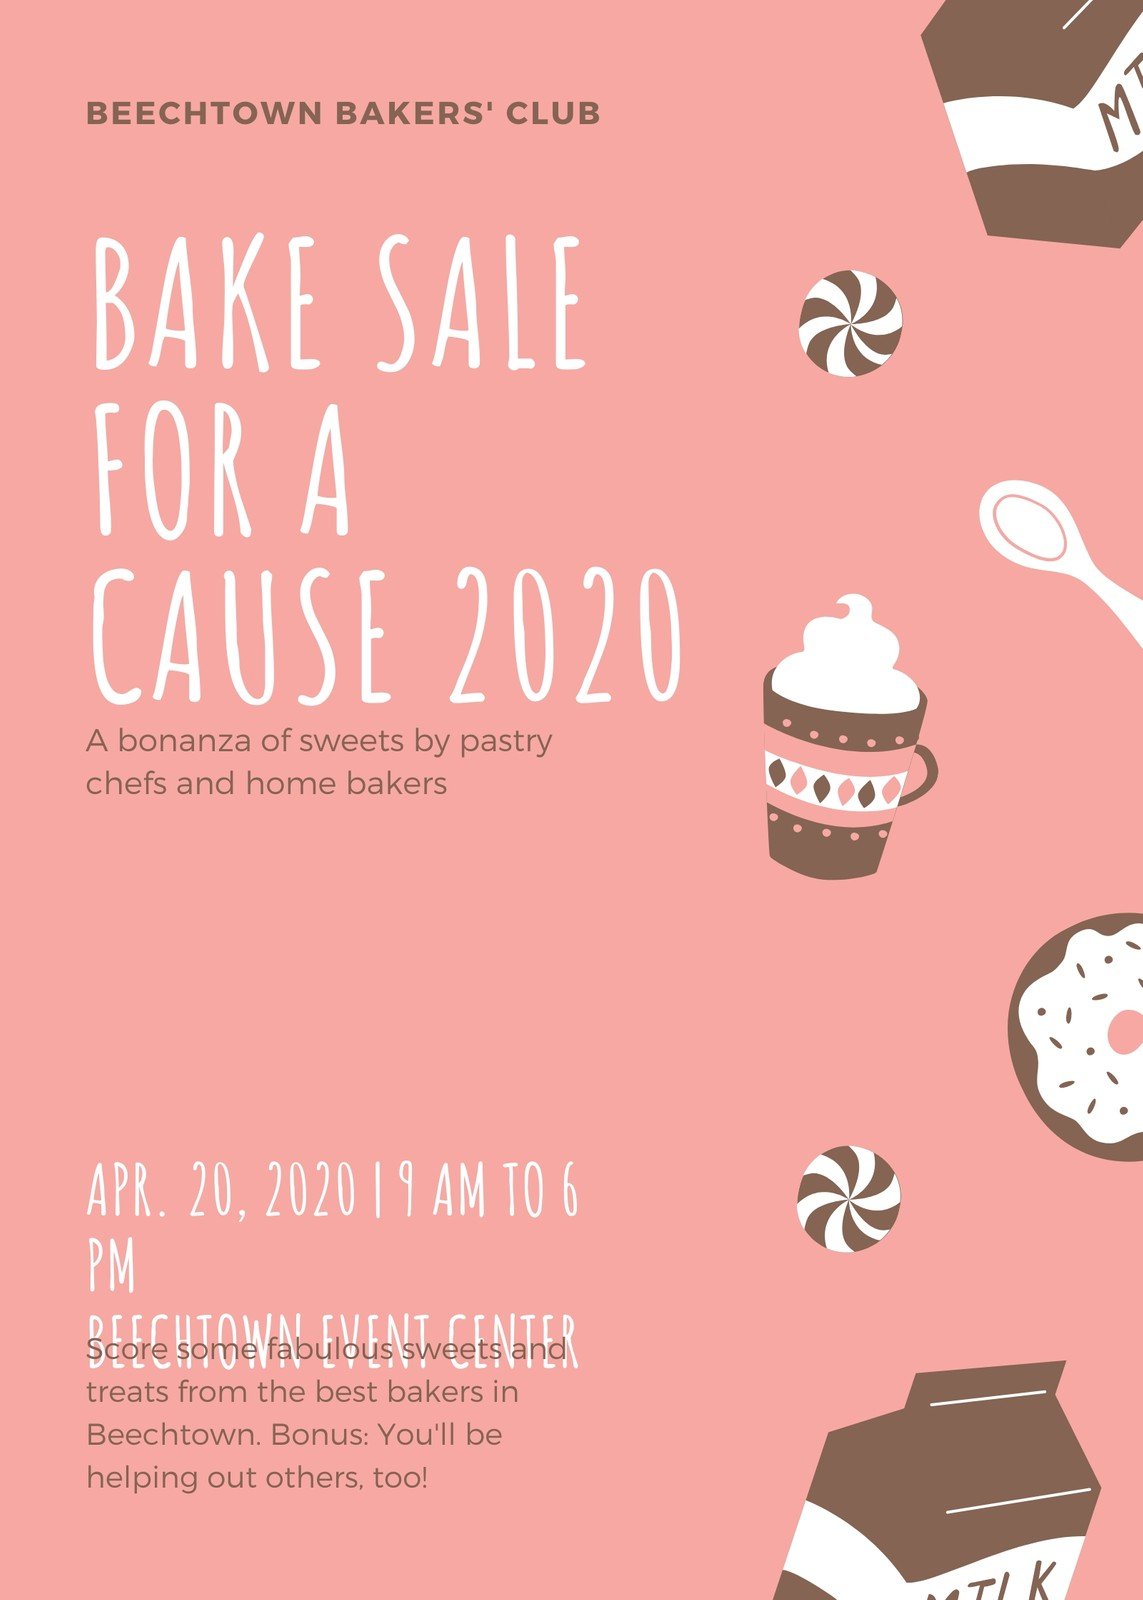 Customize 22+ Bake Sale Flyers Templates Online - Canva In Bake Off Flyer Template